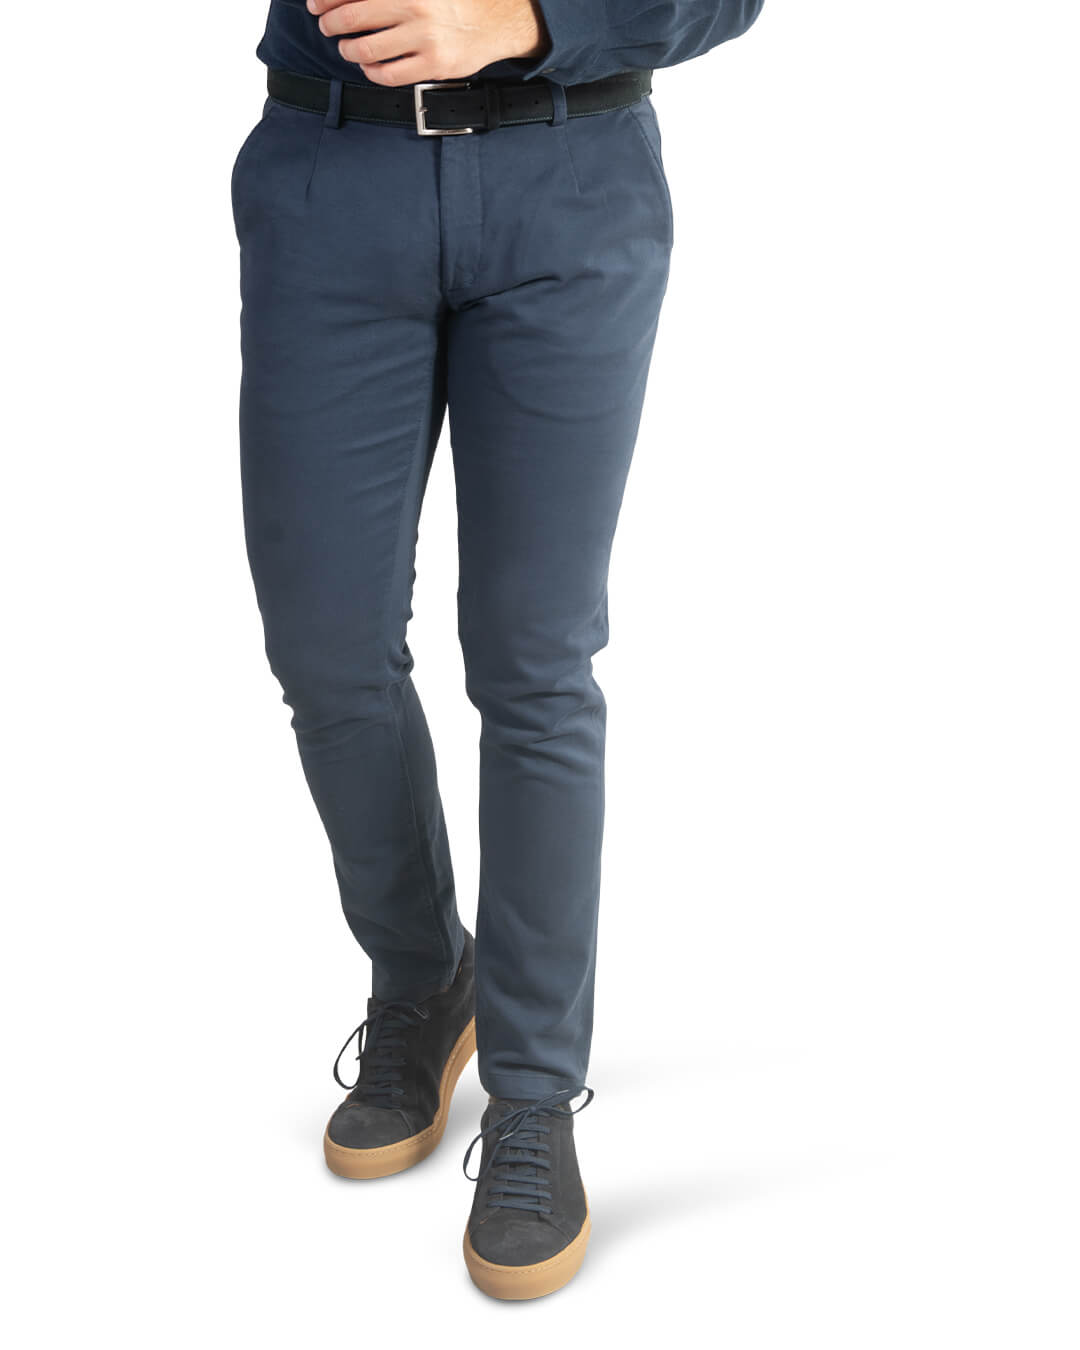 Navy Twill Garment Dyed Chino Trousers